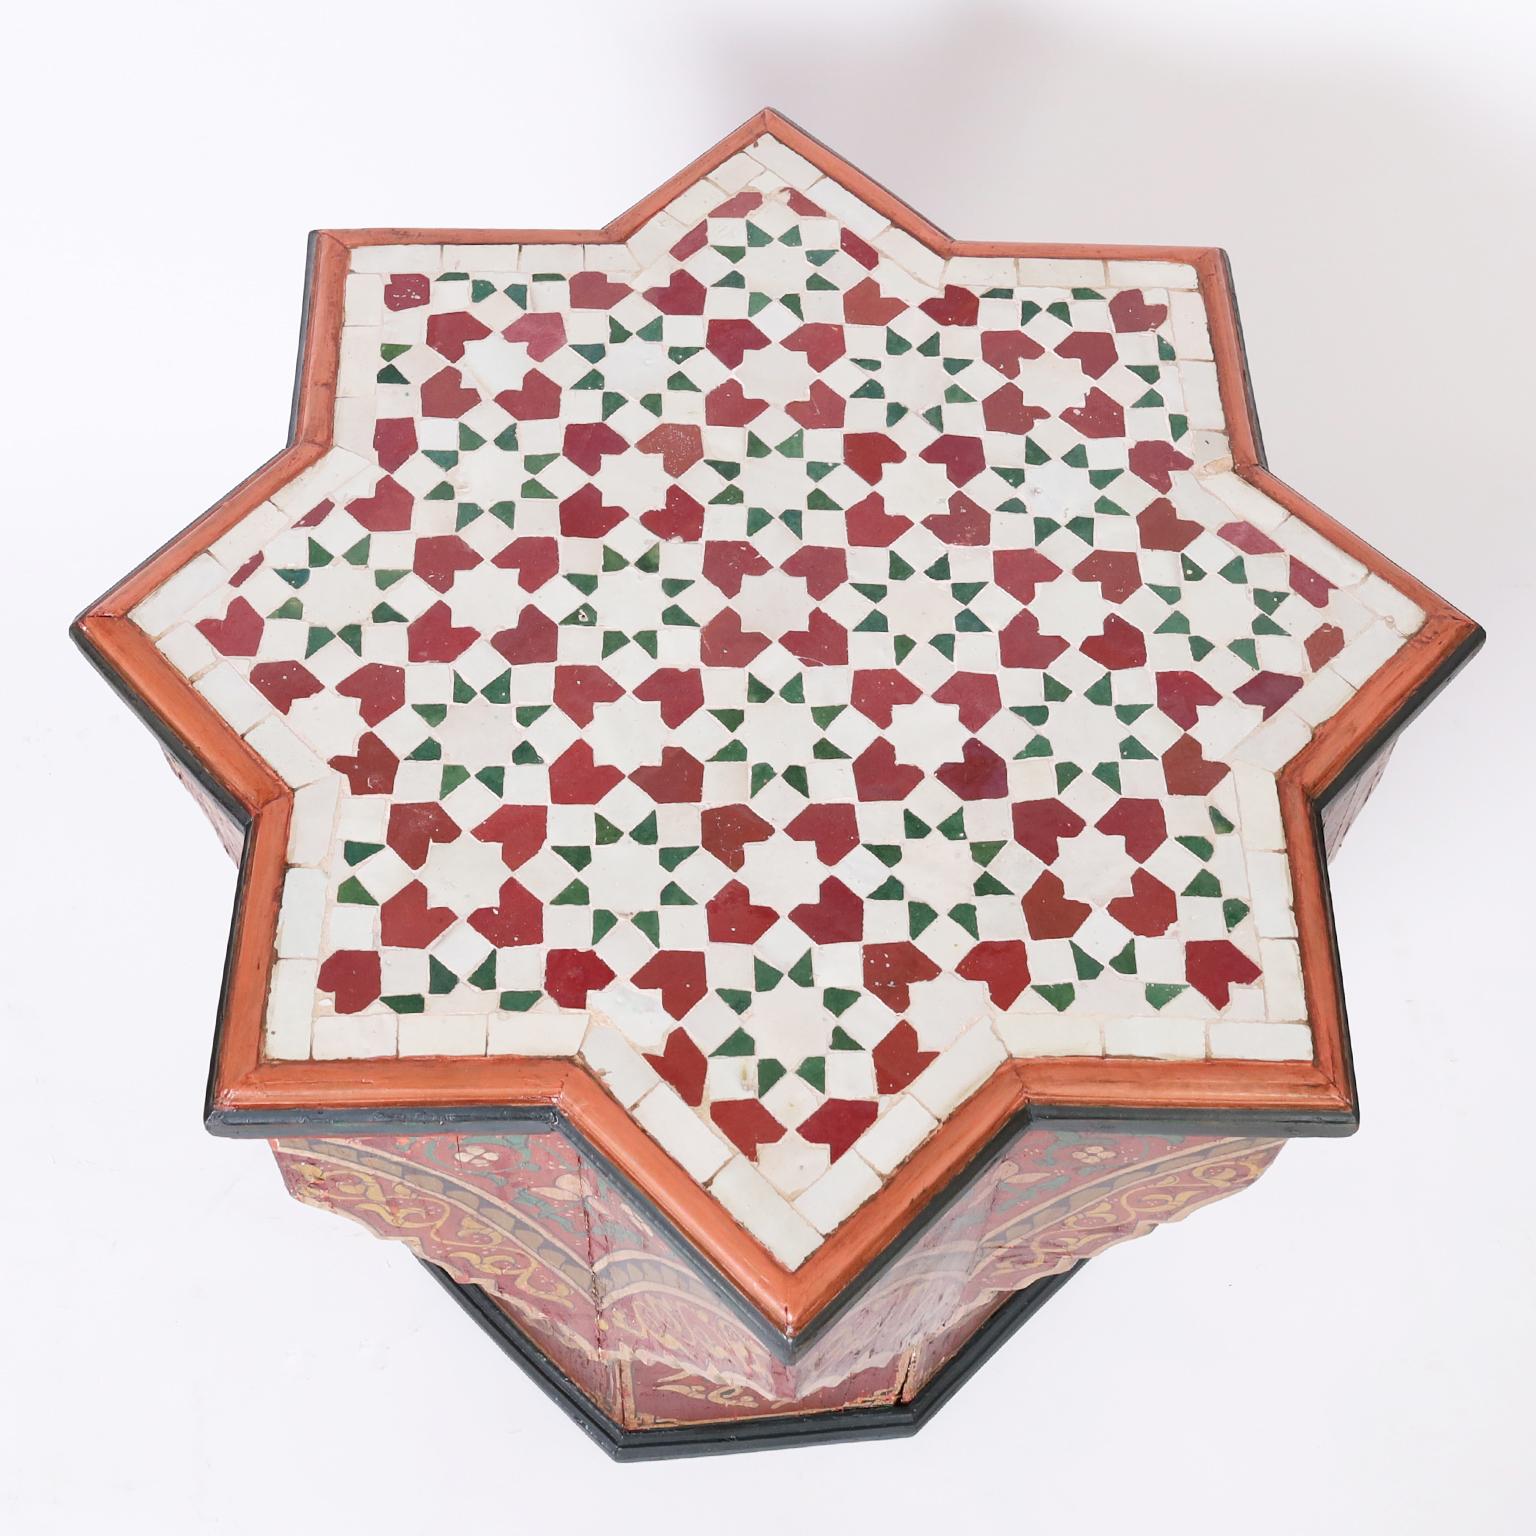 Hand-Crafted Moroccan Painted Tile Top Stand or Table For Sale